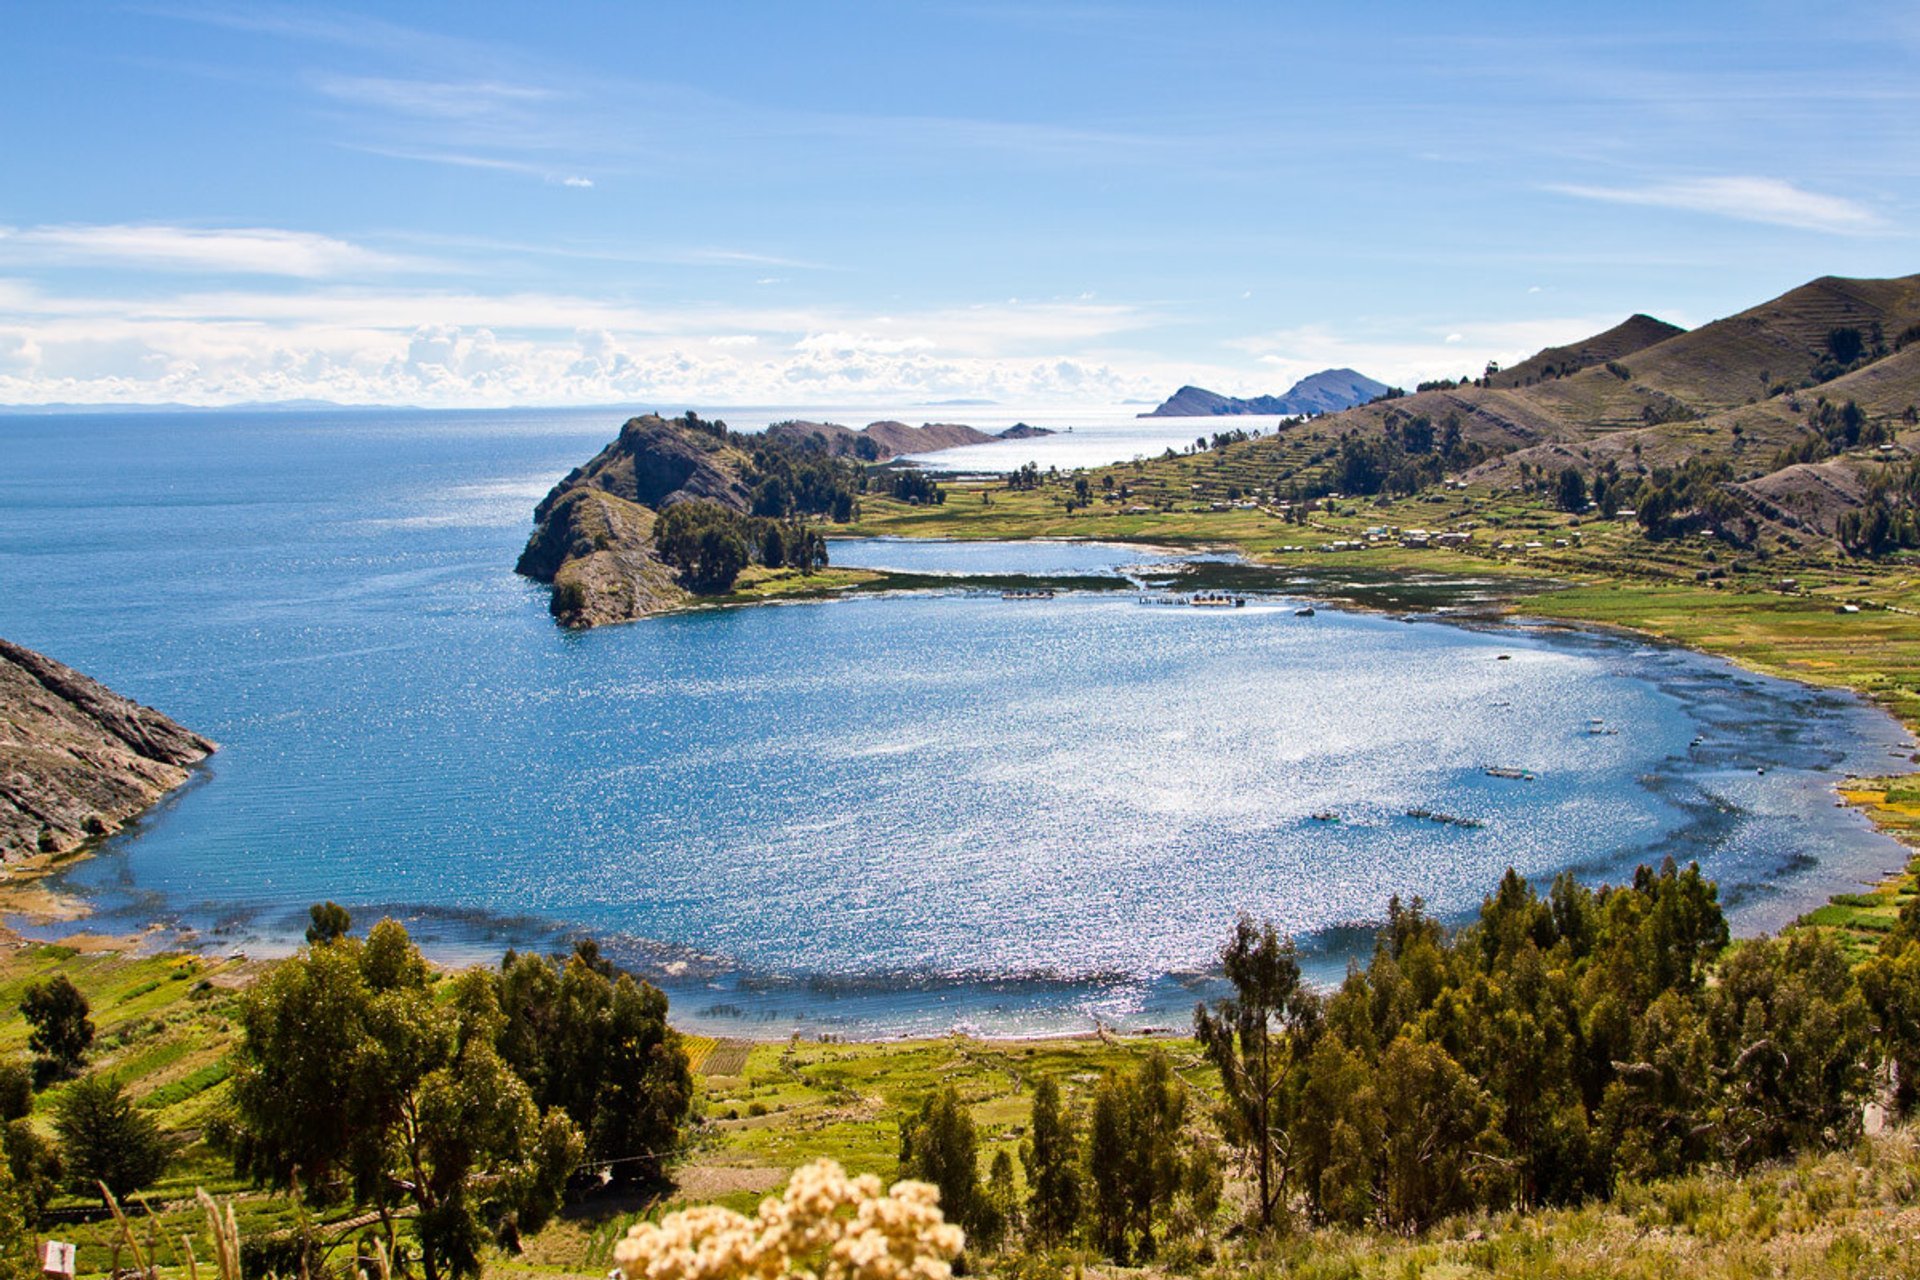 Titicaca and other Mountain Lakes